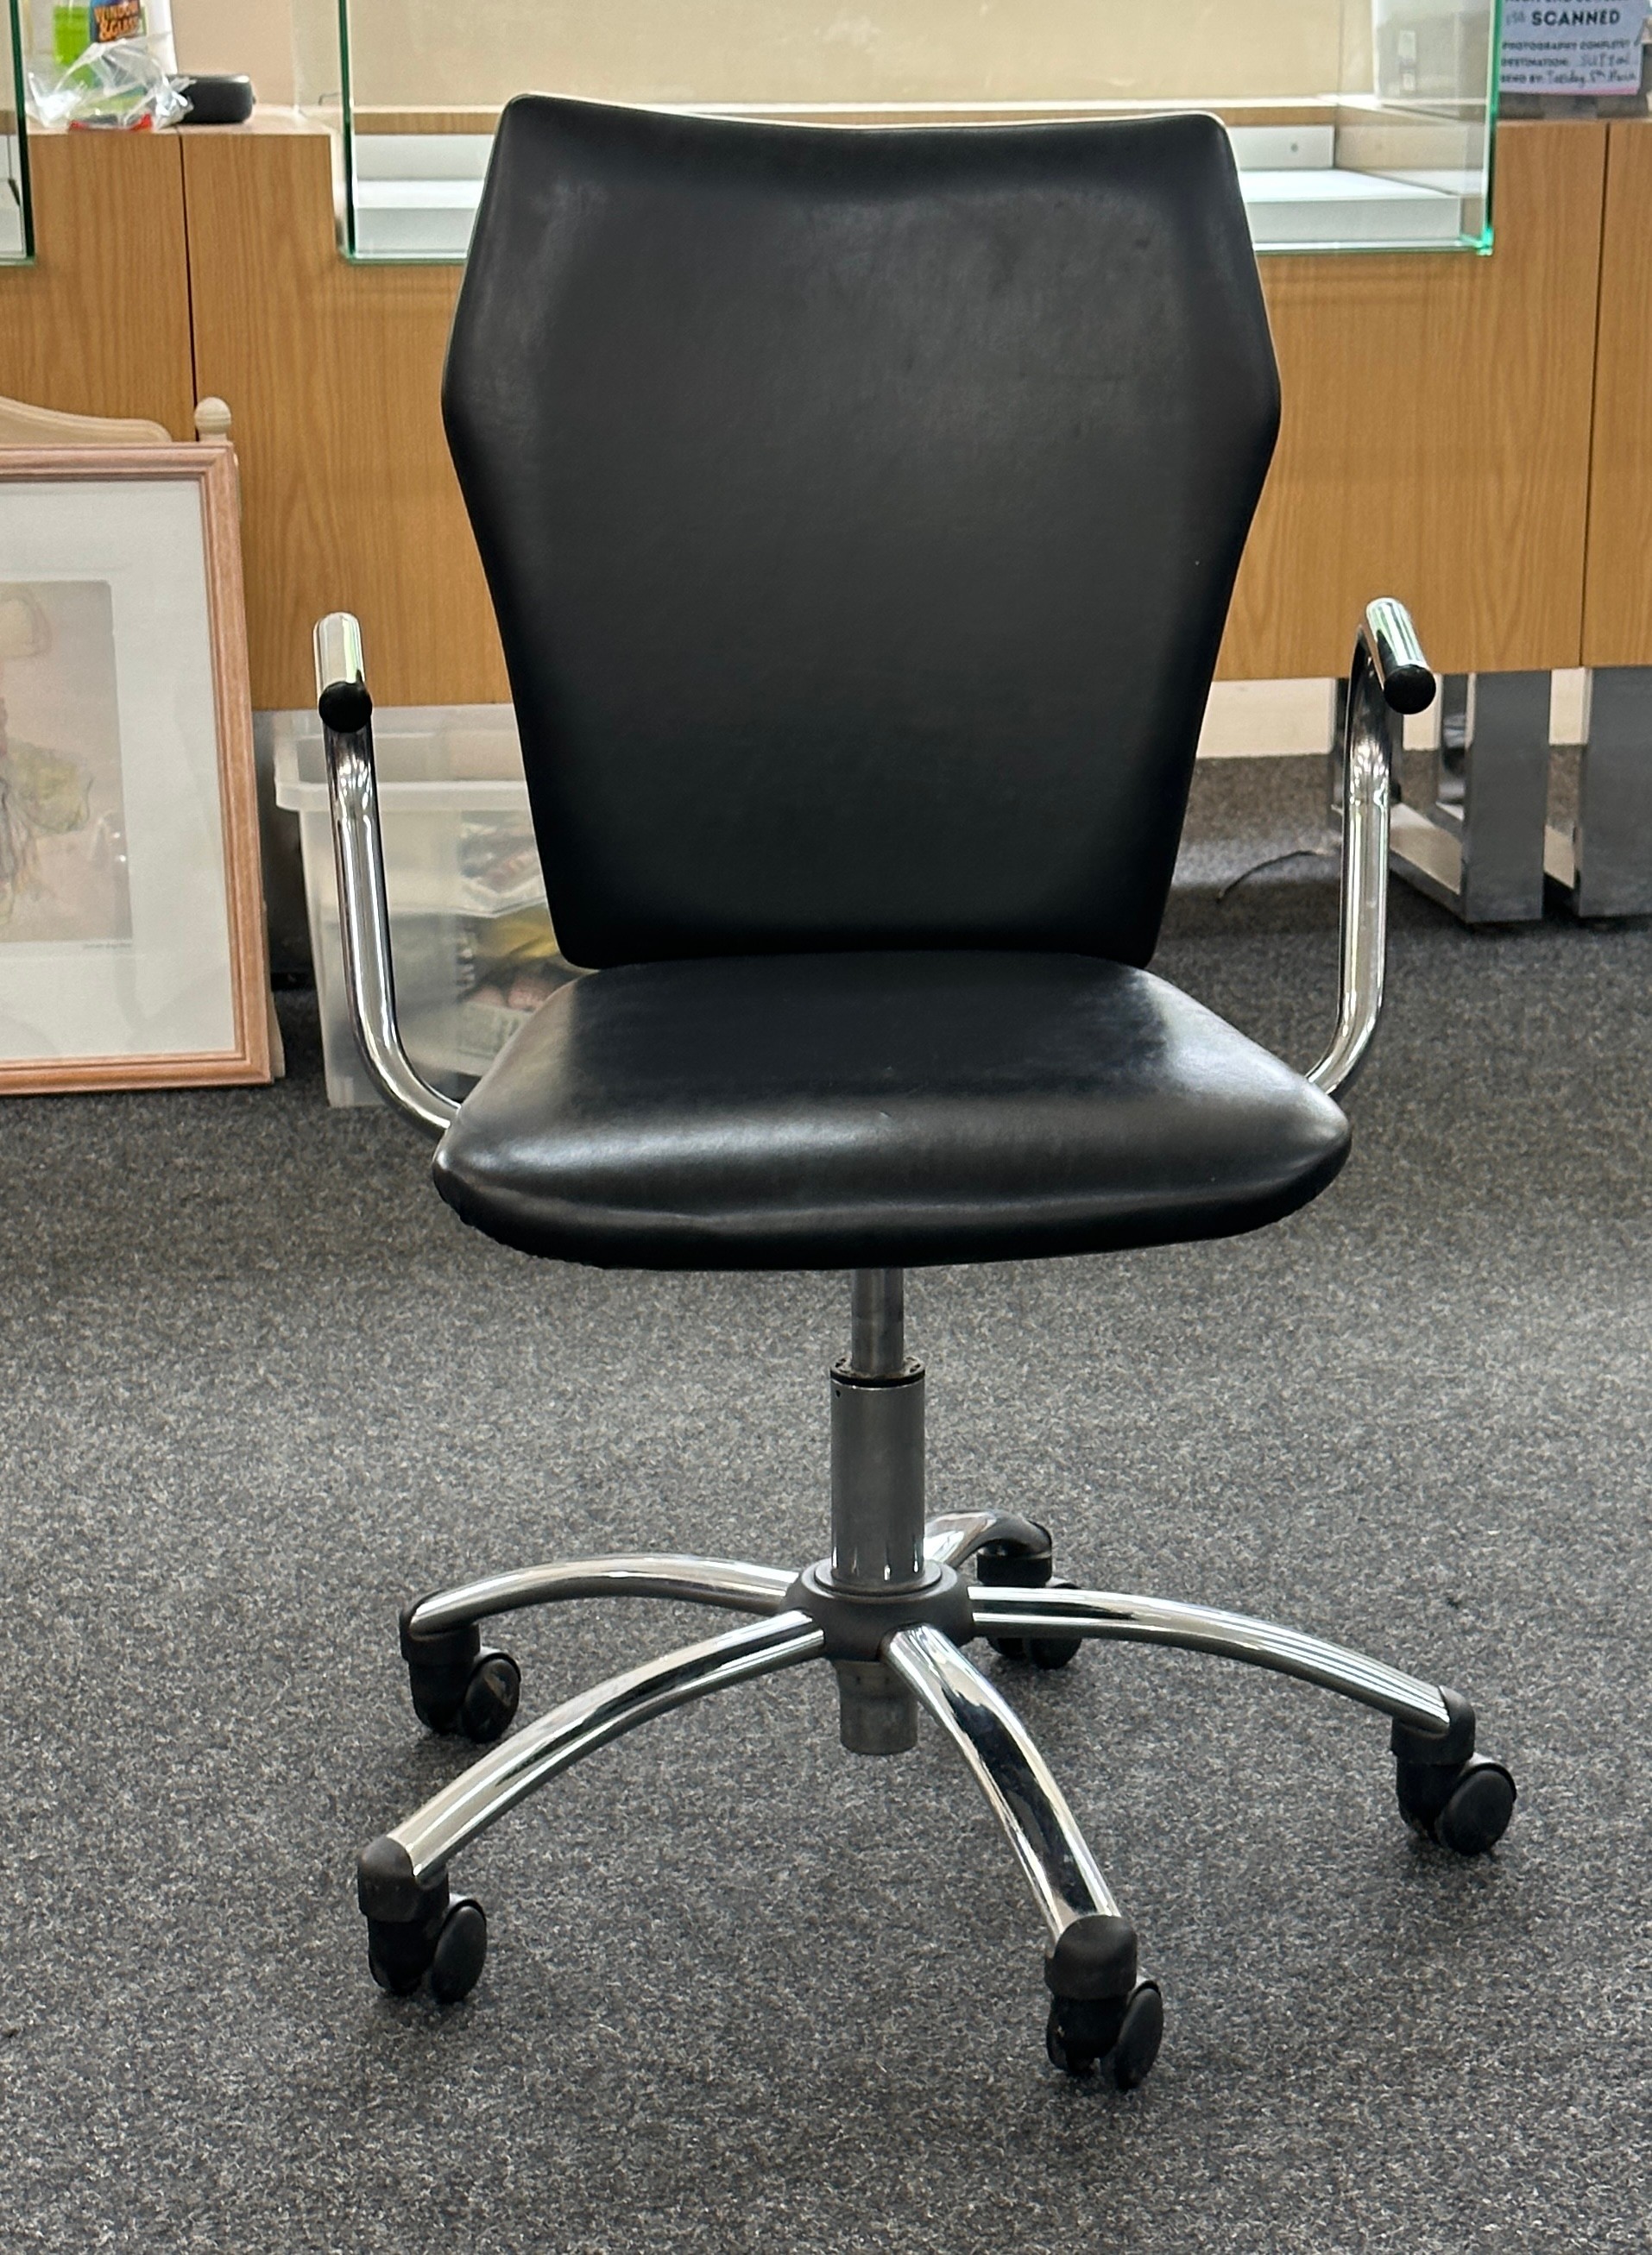 Black swivel office chair - Image 2 of 3